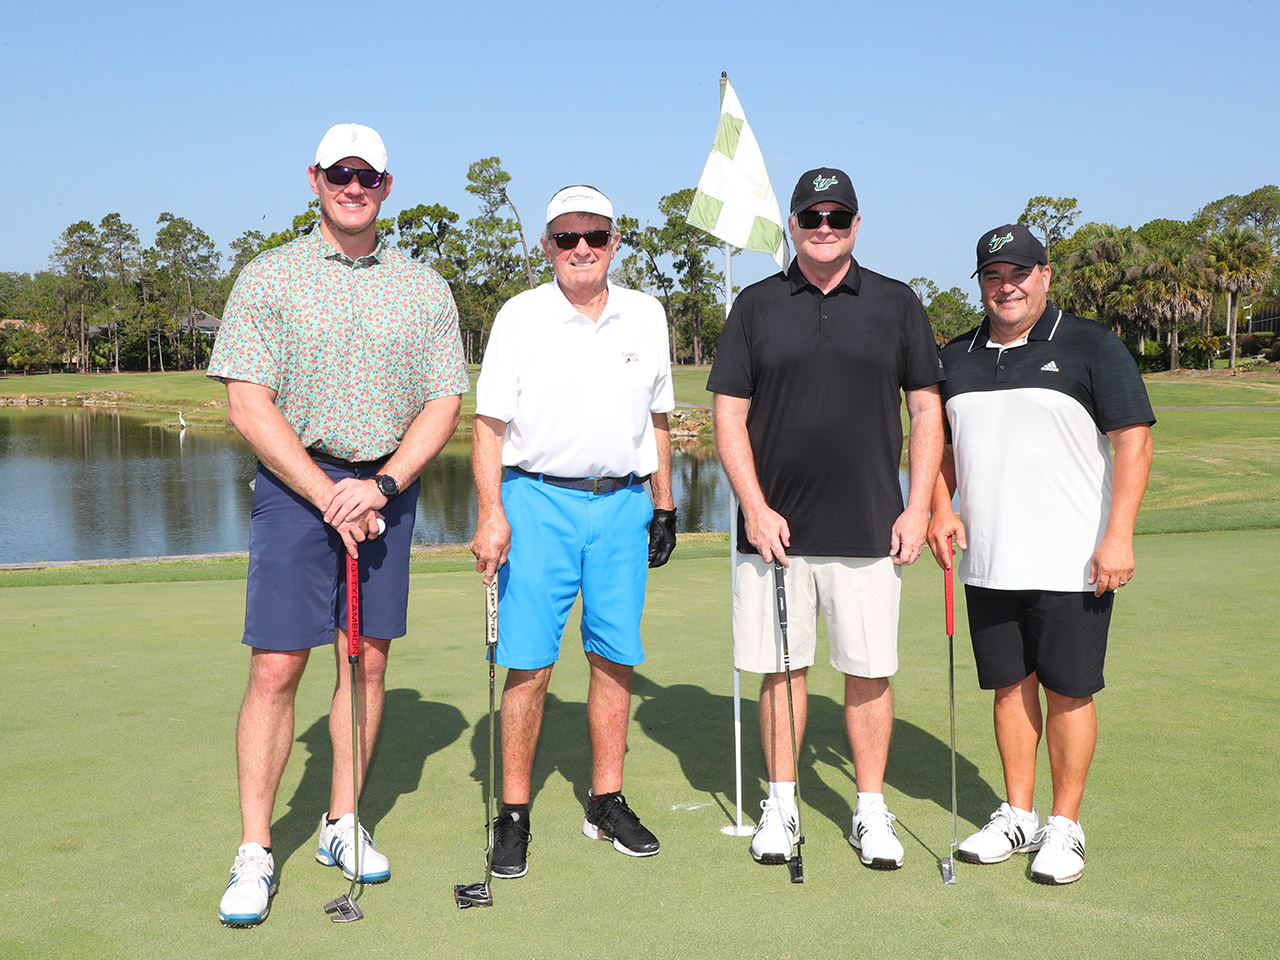 Spurrier, Edds, USF AD Michael Kelly and Lelo Prada teamed up for the tourney